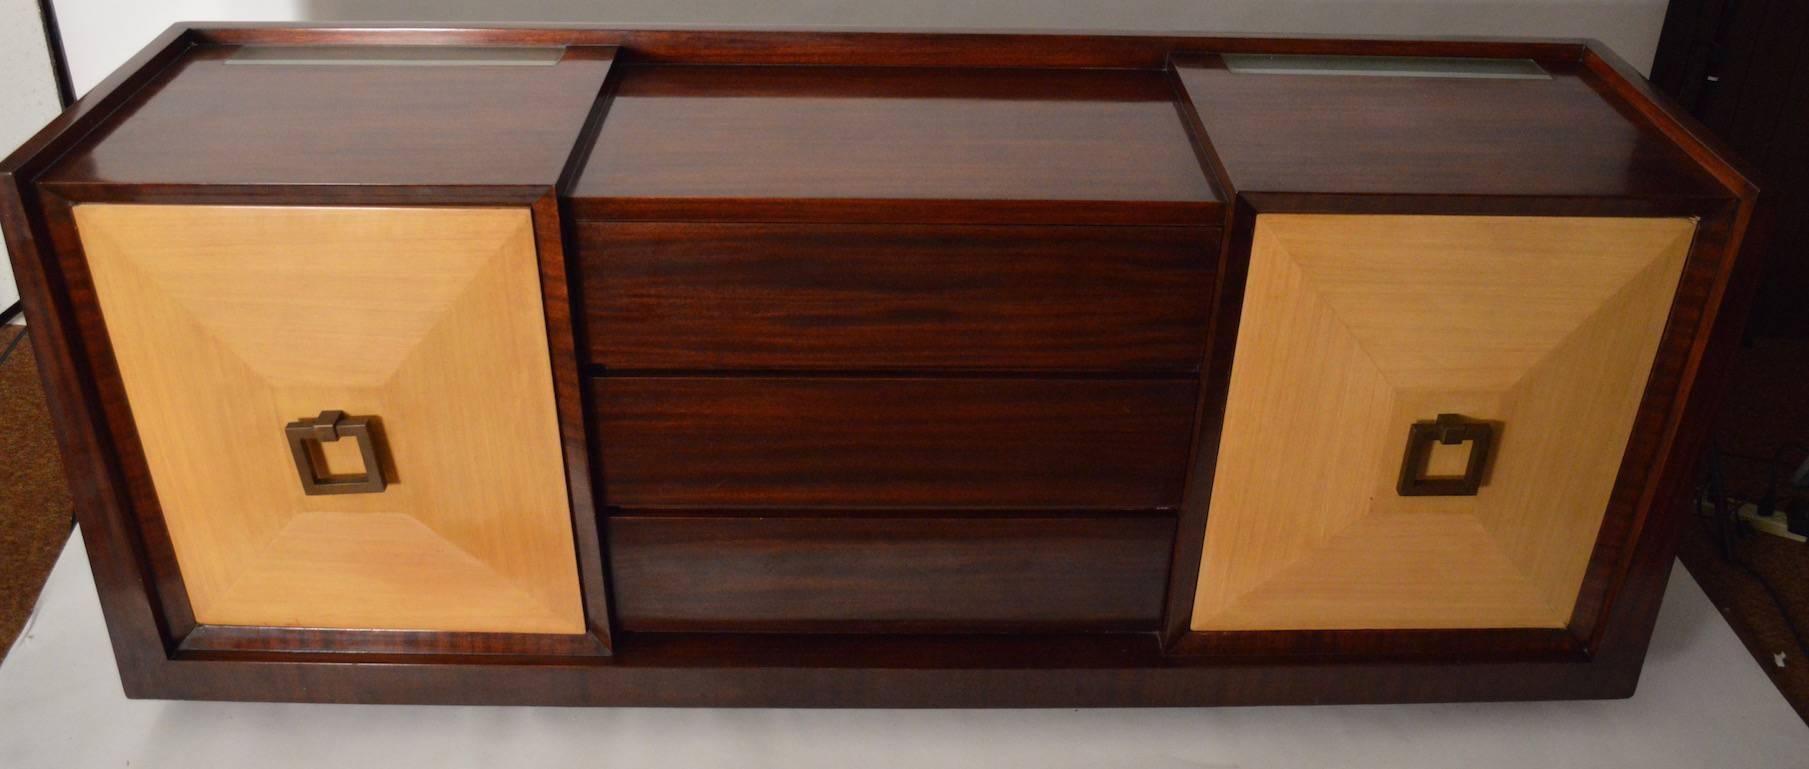 American Large Two-Tone Light Up Credenza For Sale